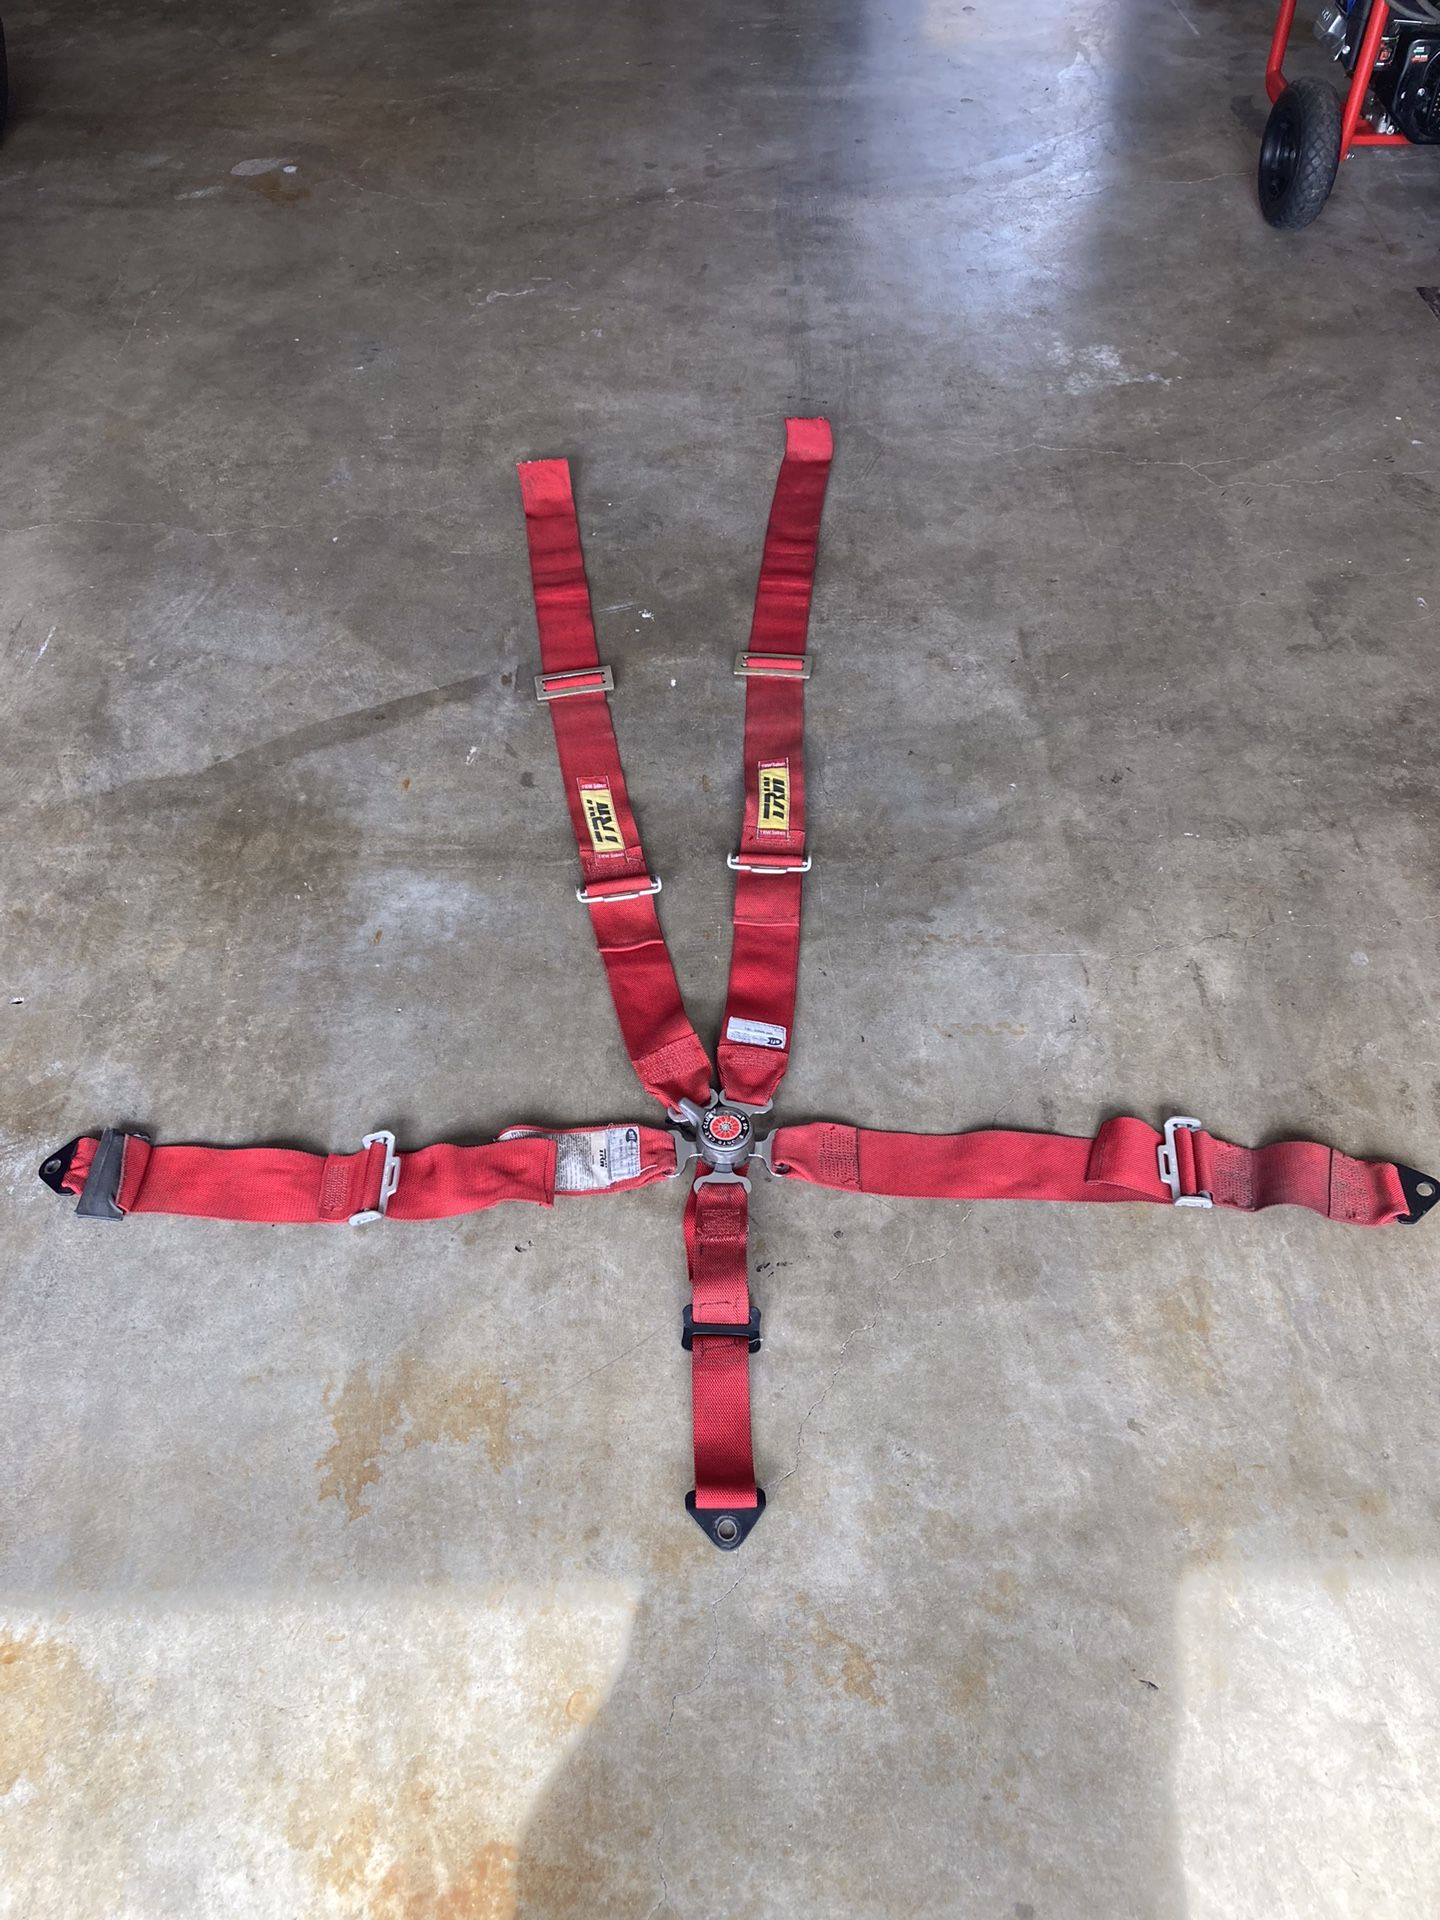 TRW 5 Point Racing Harness Used Out Of Date.